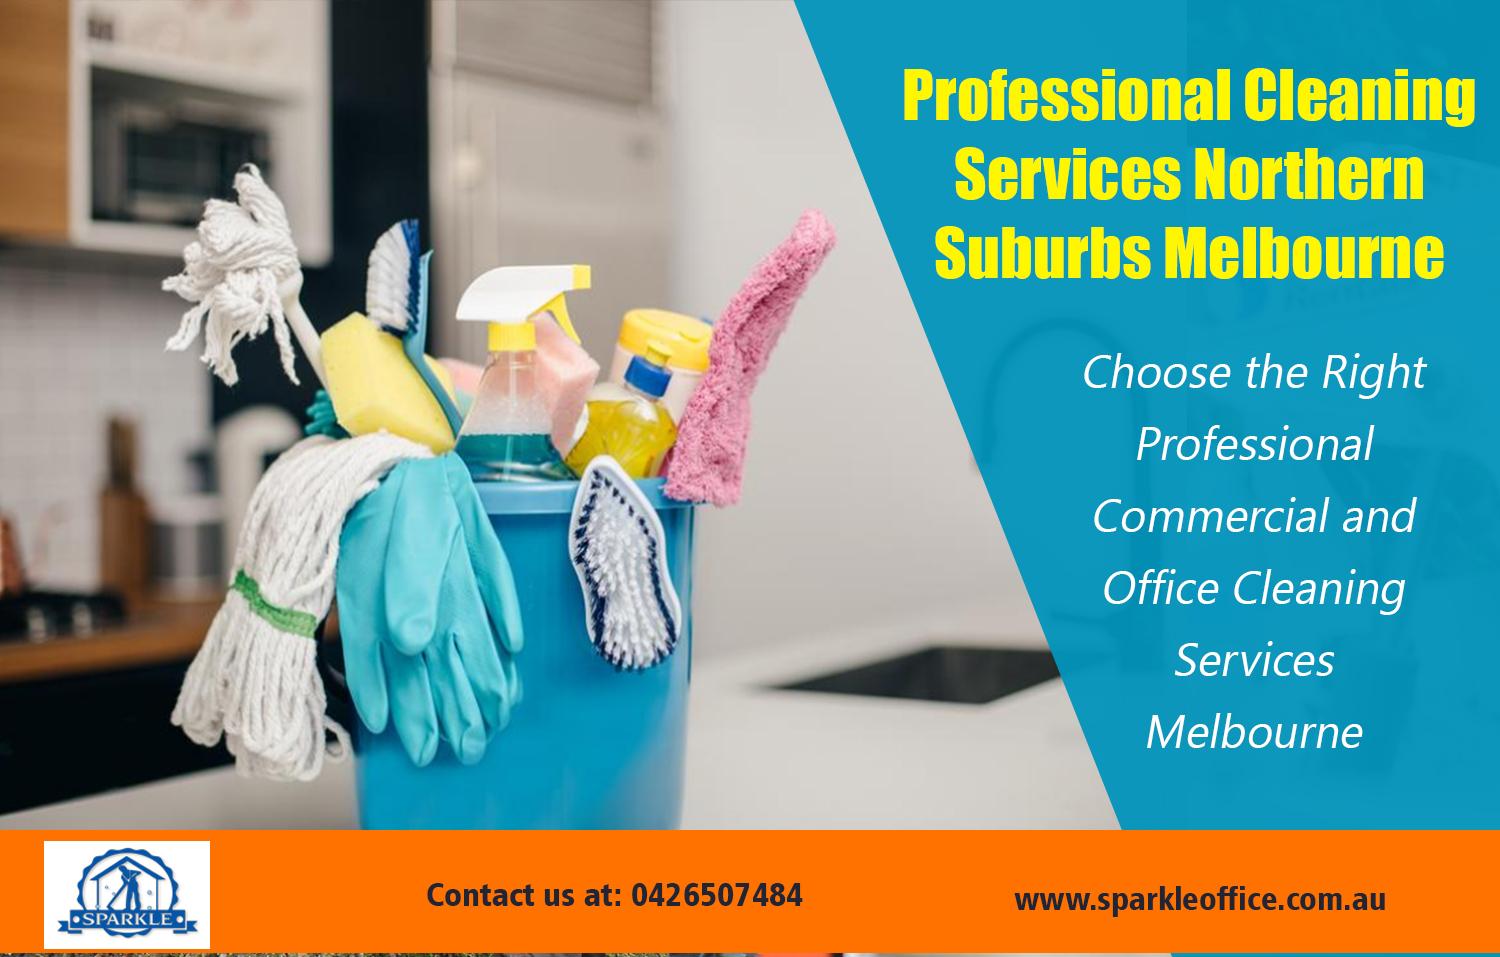 Professional Cleaning Services northern suburbs Melbourne